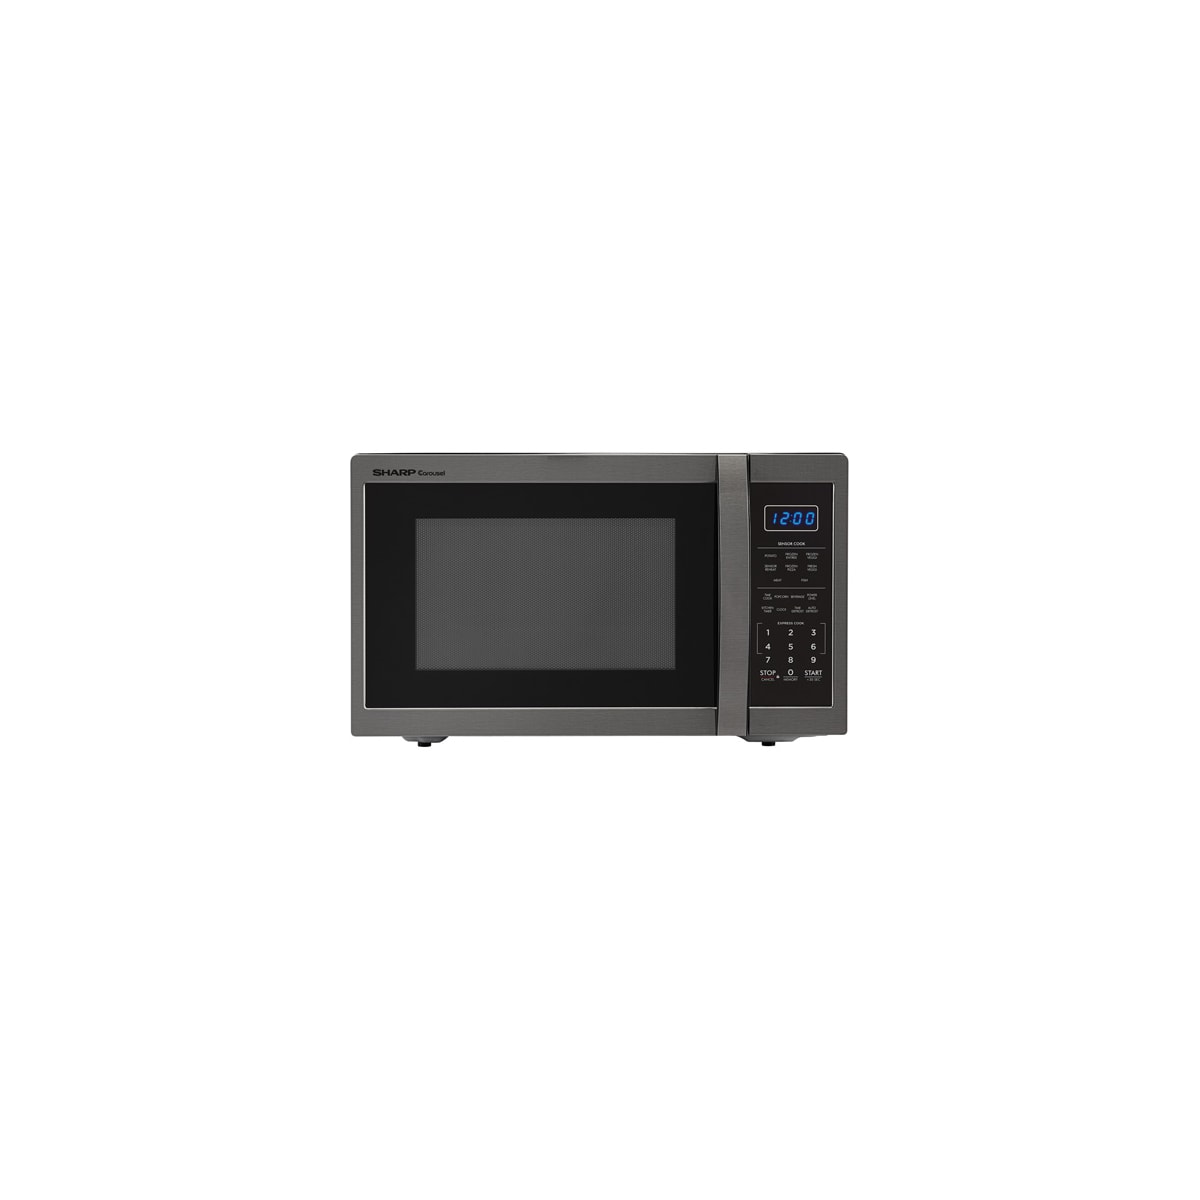 Buy Sharp 0.7 cu. ft. 700W Stainless Steel Carousel Countertop Microwave  Oven